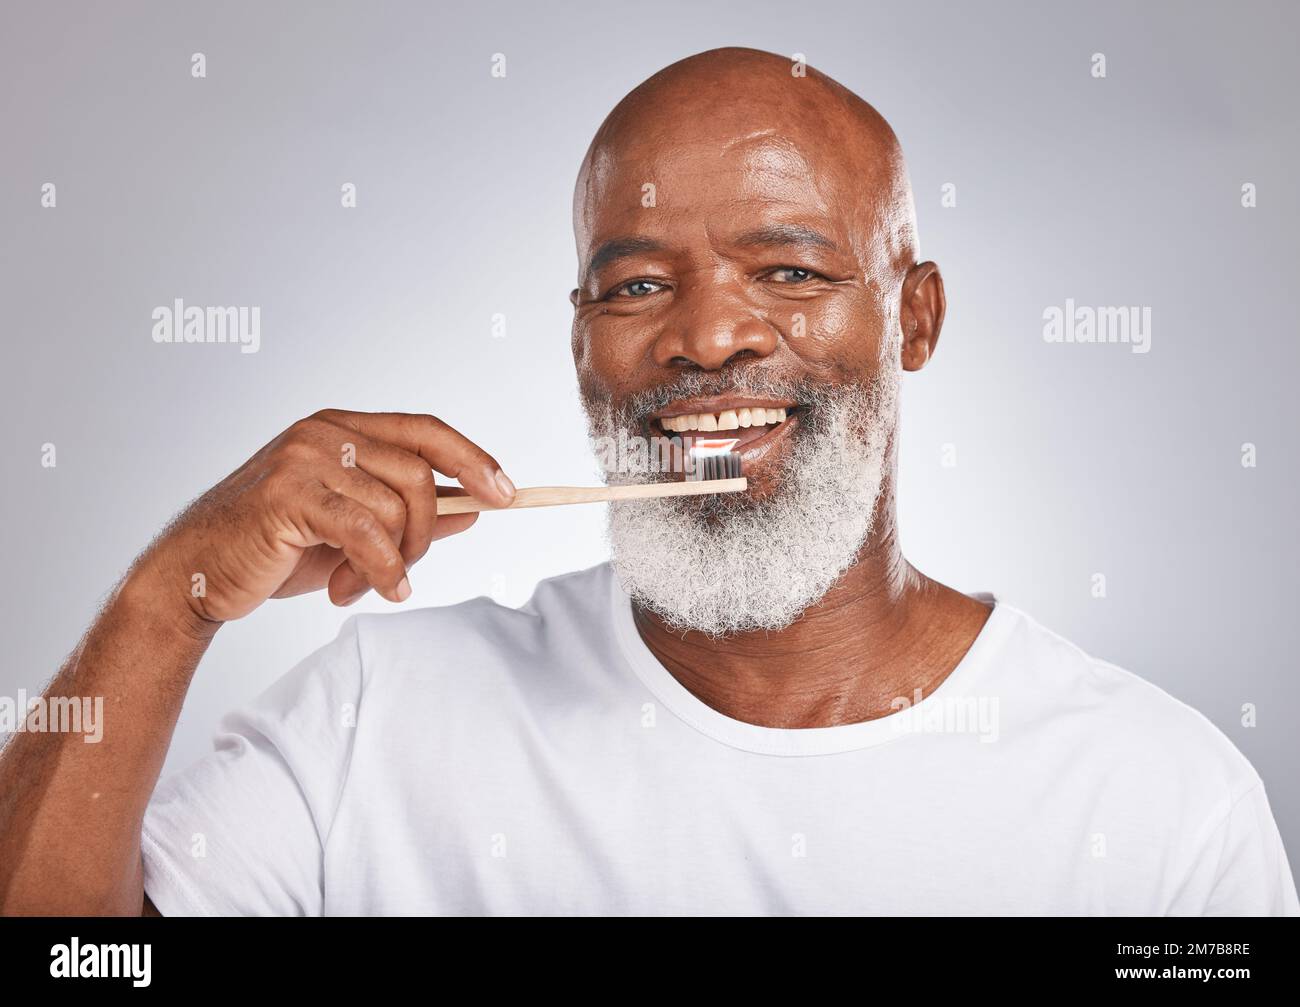 Brushing teeth, studio portrait and black man with toothbrush for mature dental wellness, healthy lifestyle or cleaning aesthetic in Nigeria. Happy Stock Photo